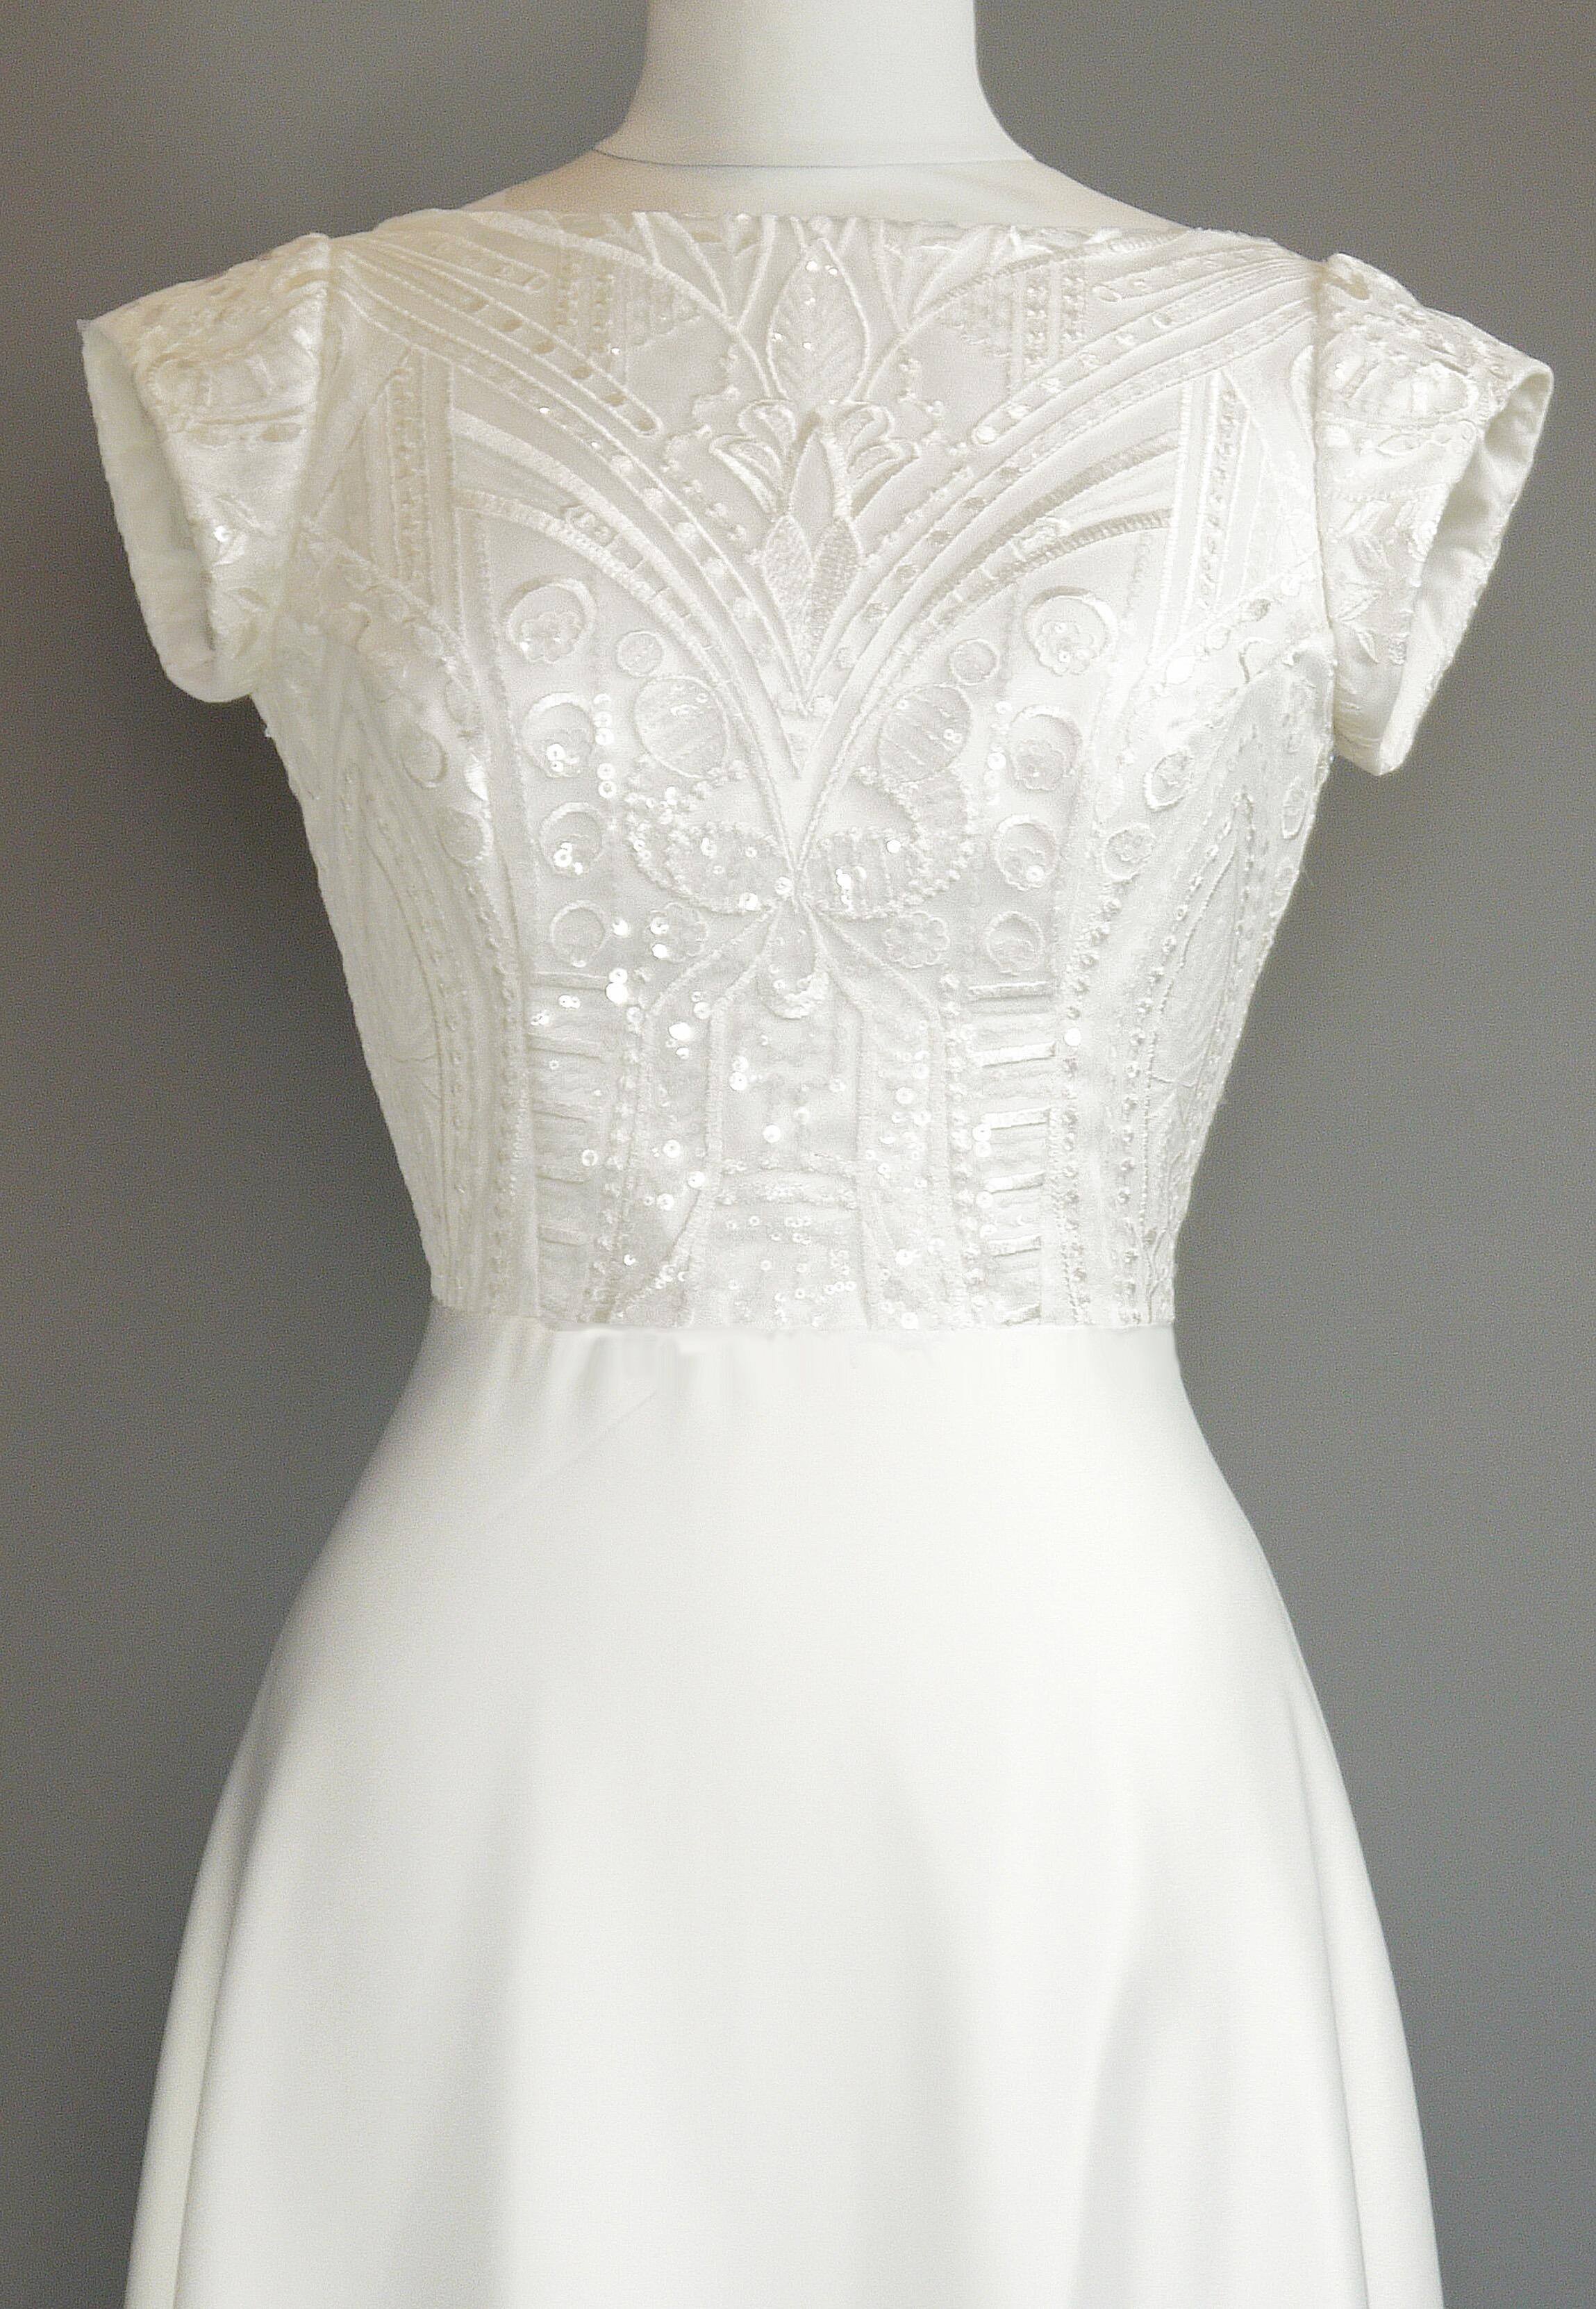 Gatsby Wedding Gown in Ivory Satin & Art Deco Lace